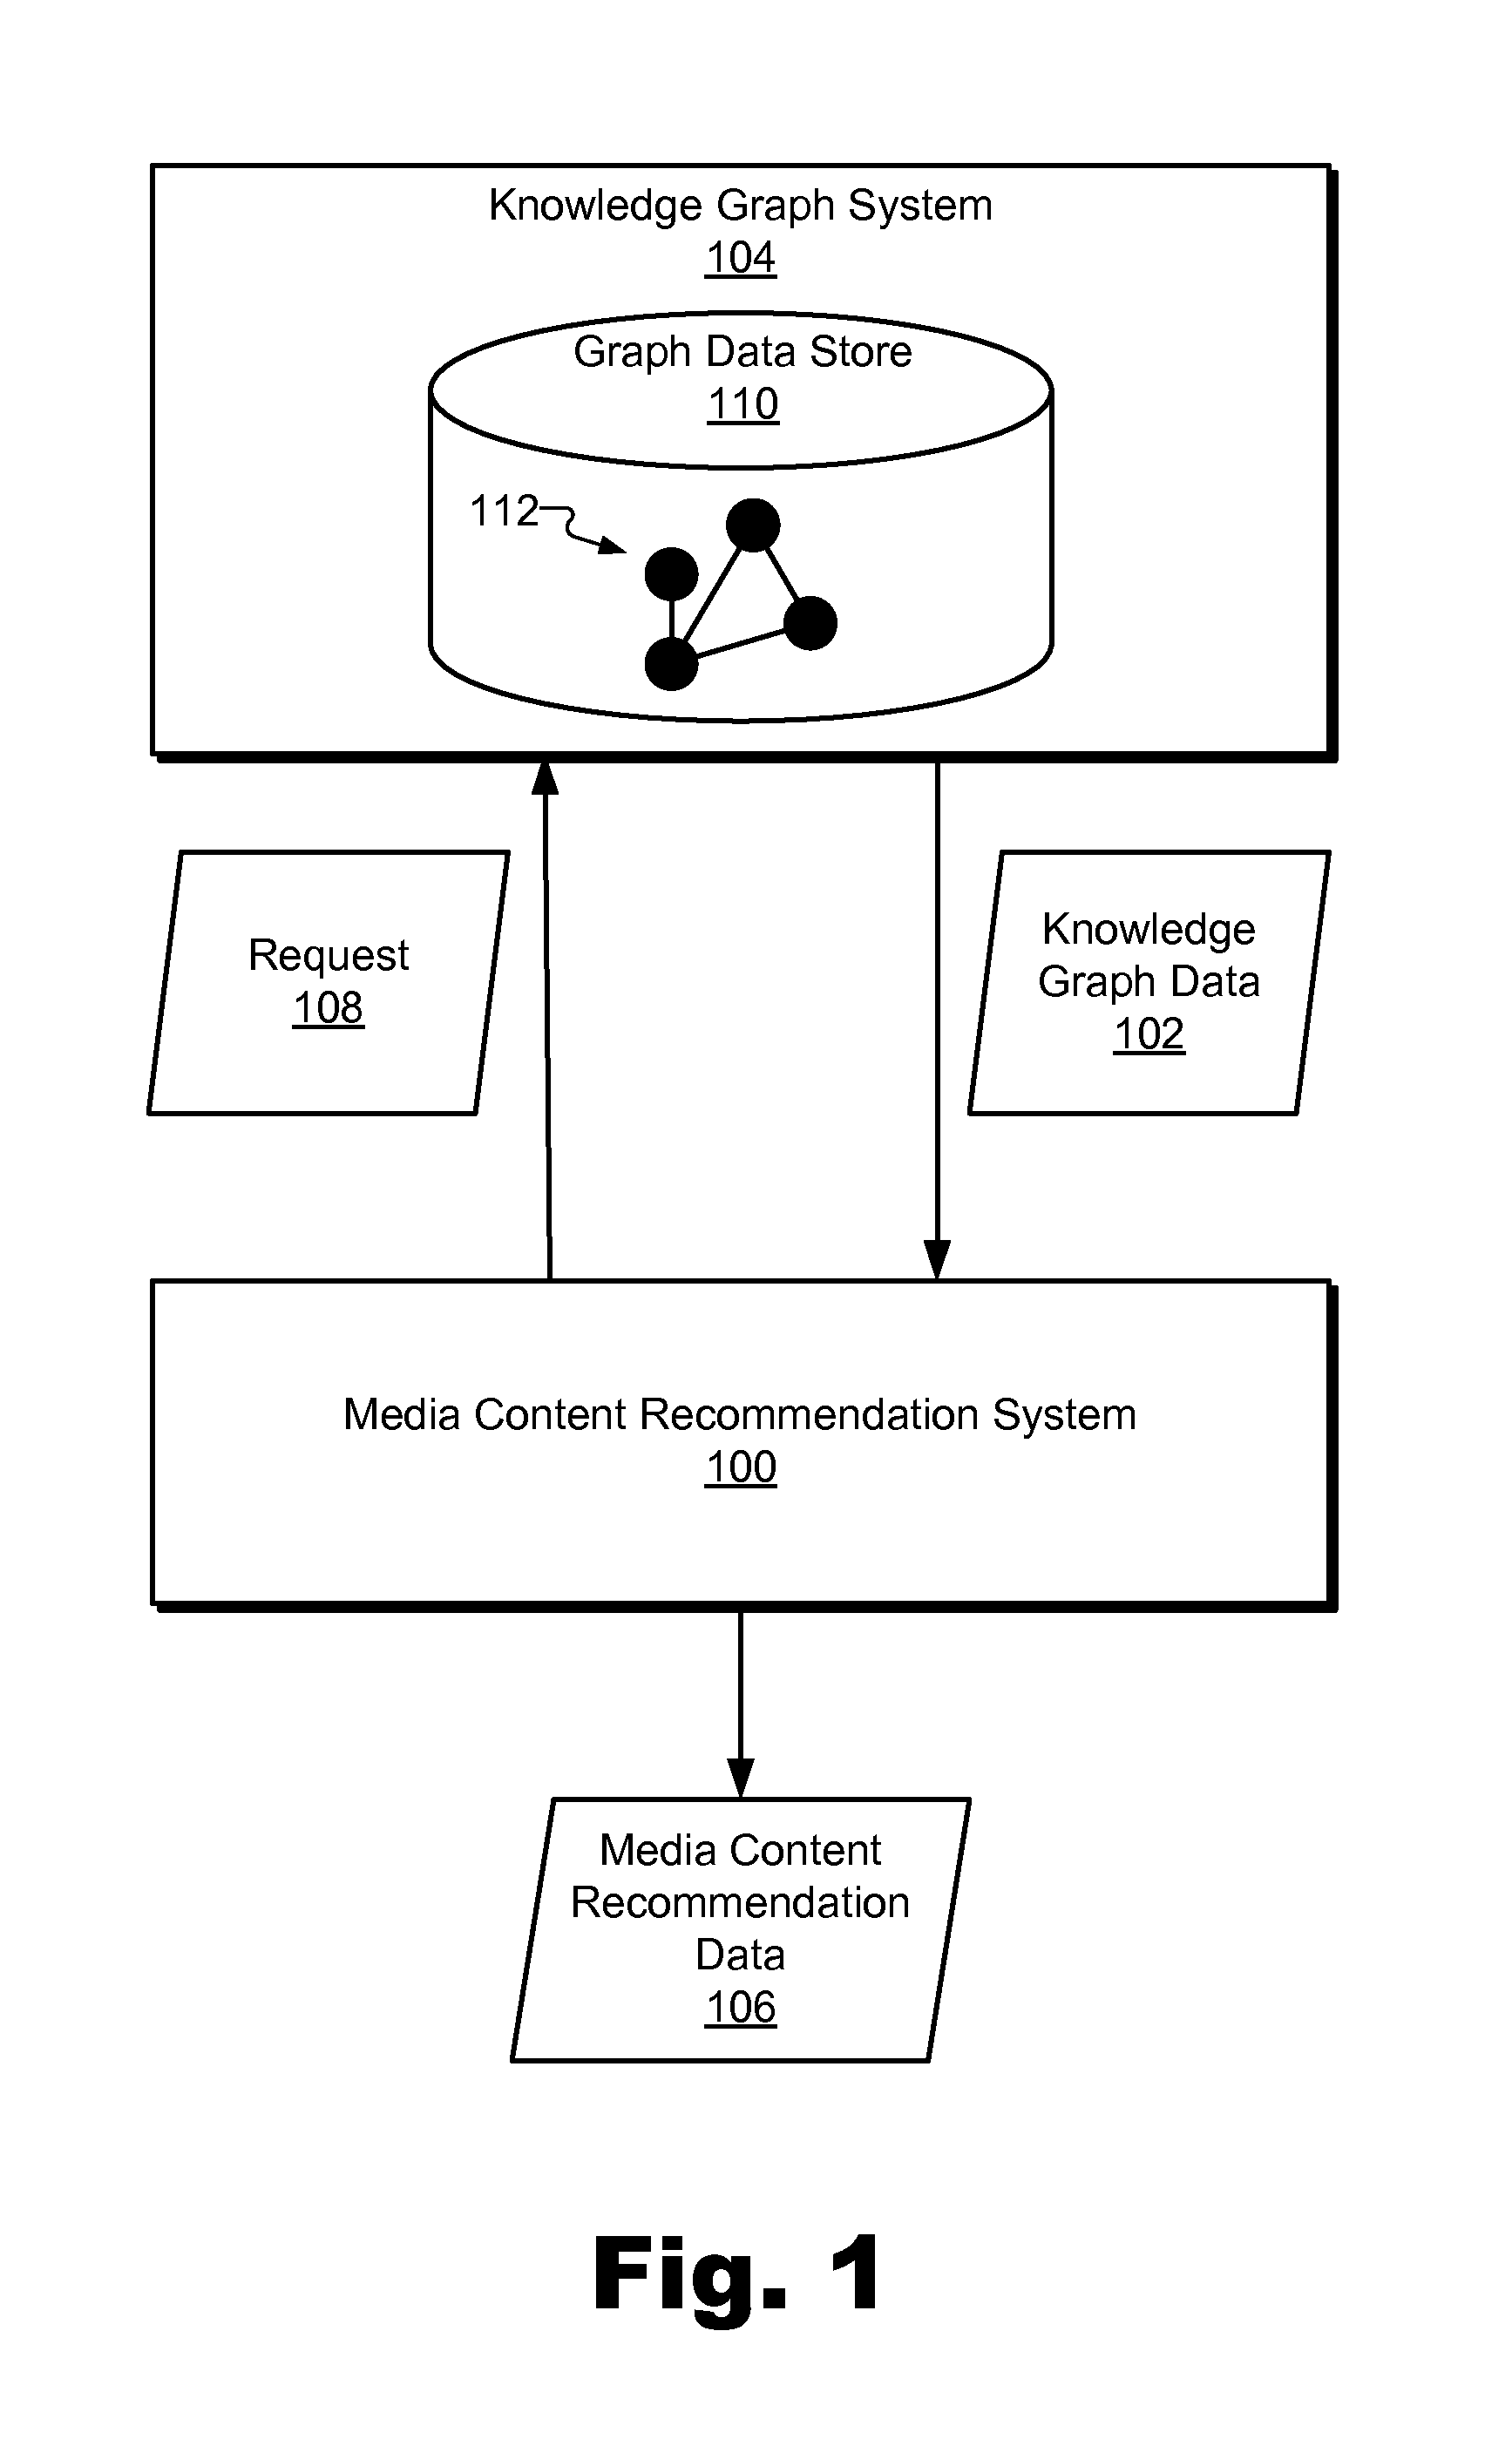 Systems and Methods of Using a Knowledge Graph to Provide a Media Content Recommendation